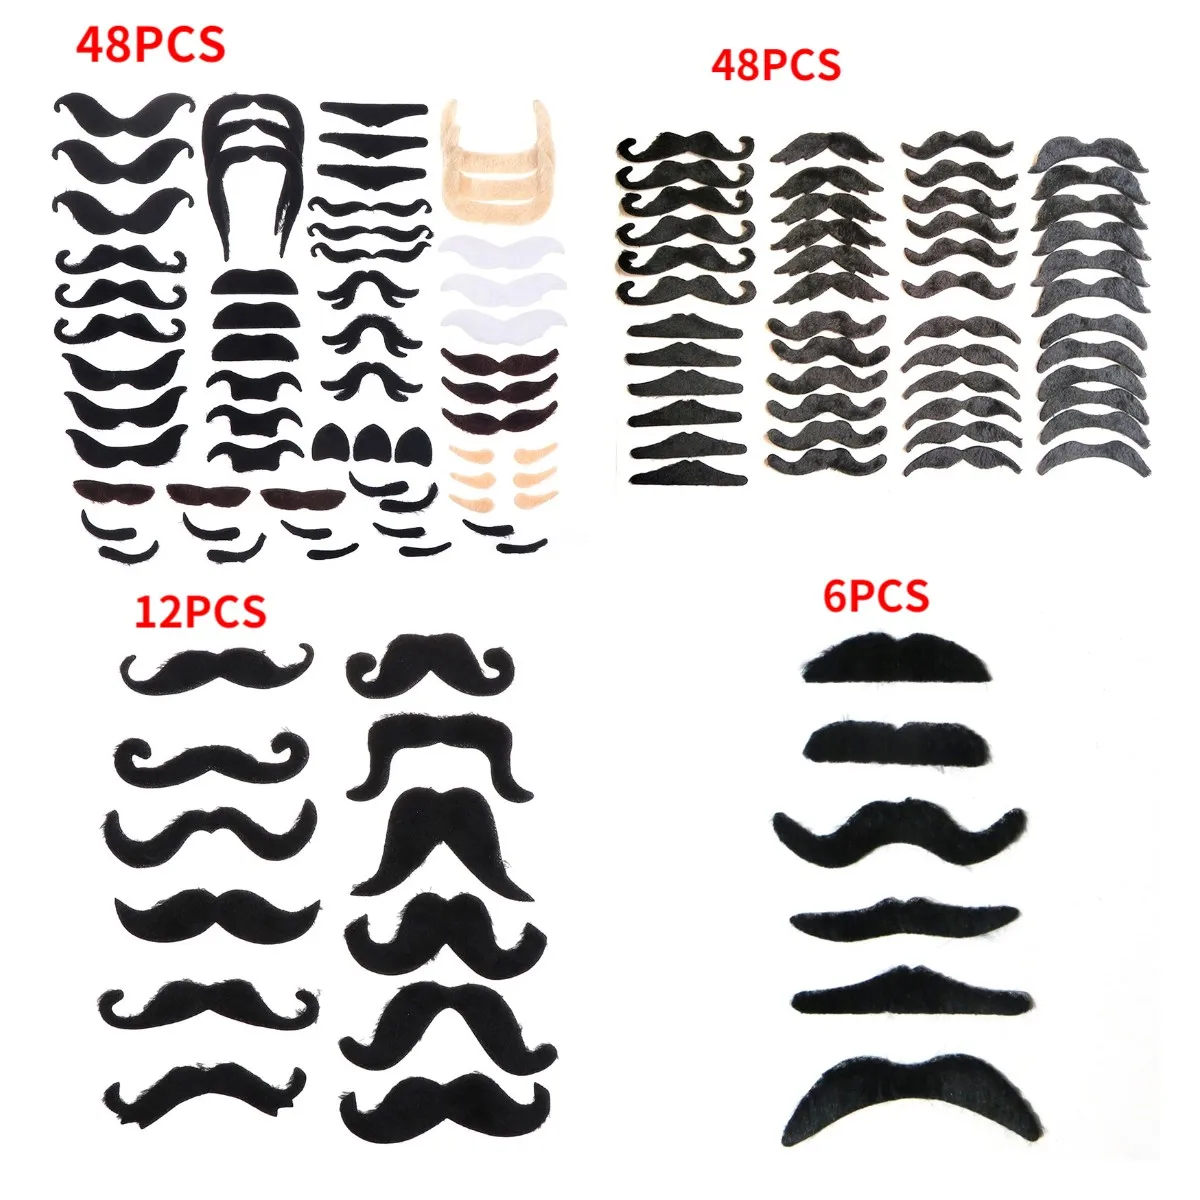 1set Funny Fake Mustache Sticker Pirate Party Decoration Halloween Cosplay Moustache Party Fake Beard Whisker Kids Adult Black